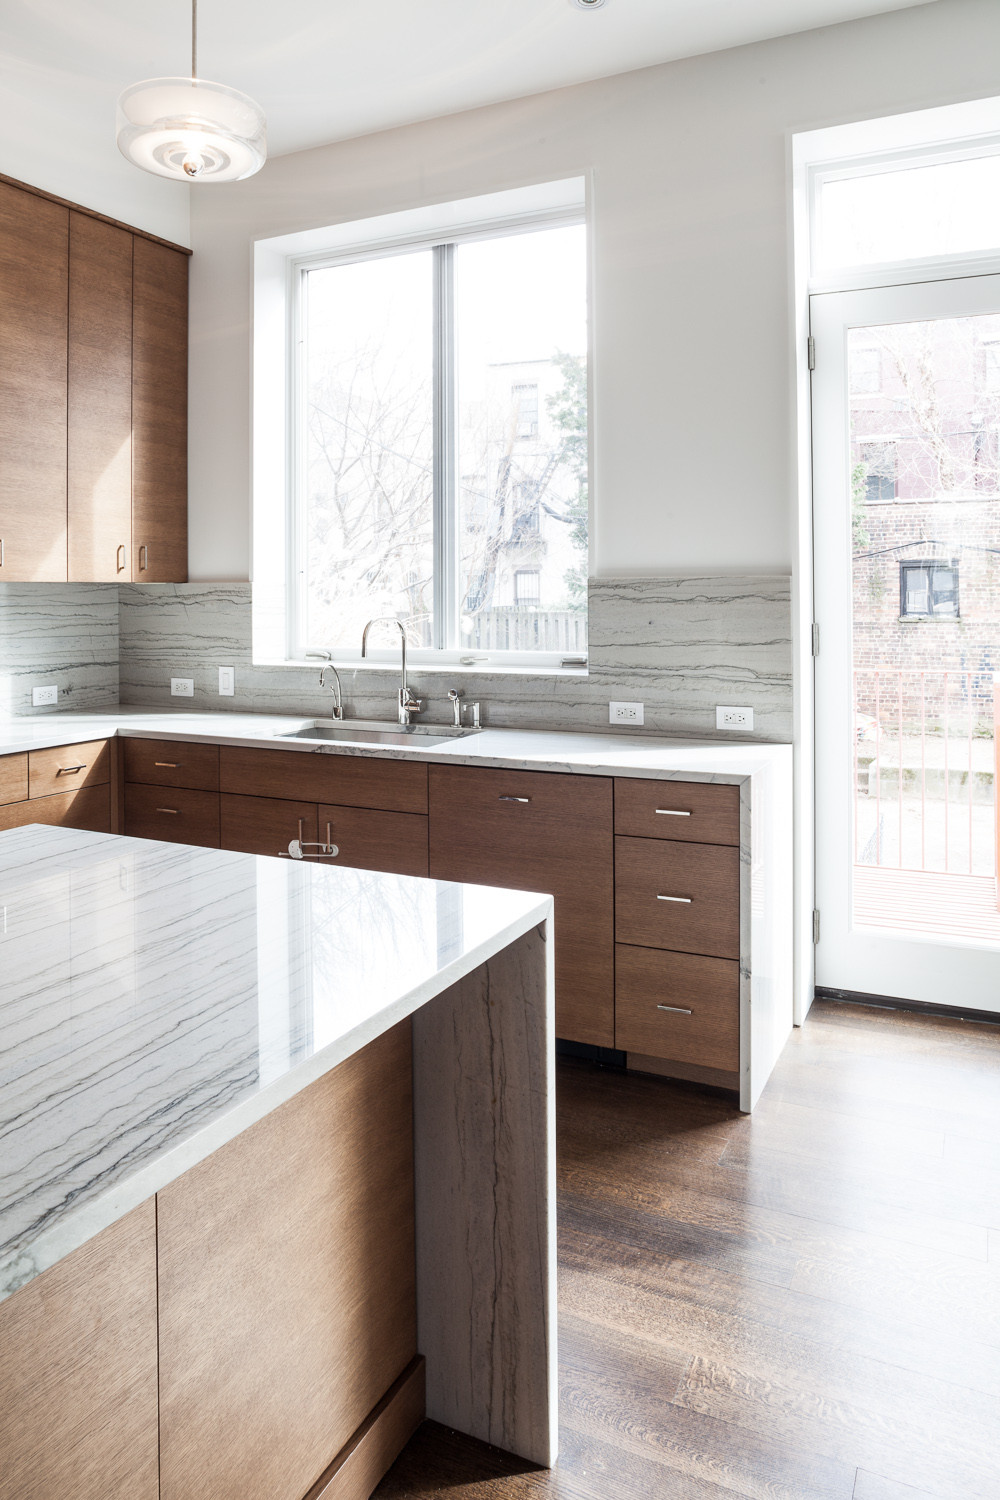 75 Beautiful Kitchen With Dark Wood Cabinets And Marble Countertops Pictures Ideas May 2021 Houzz